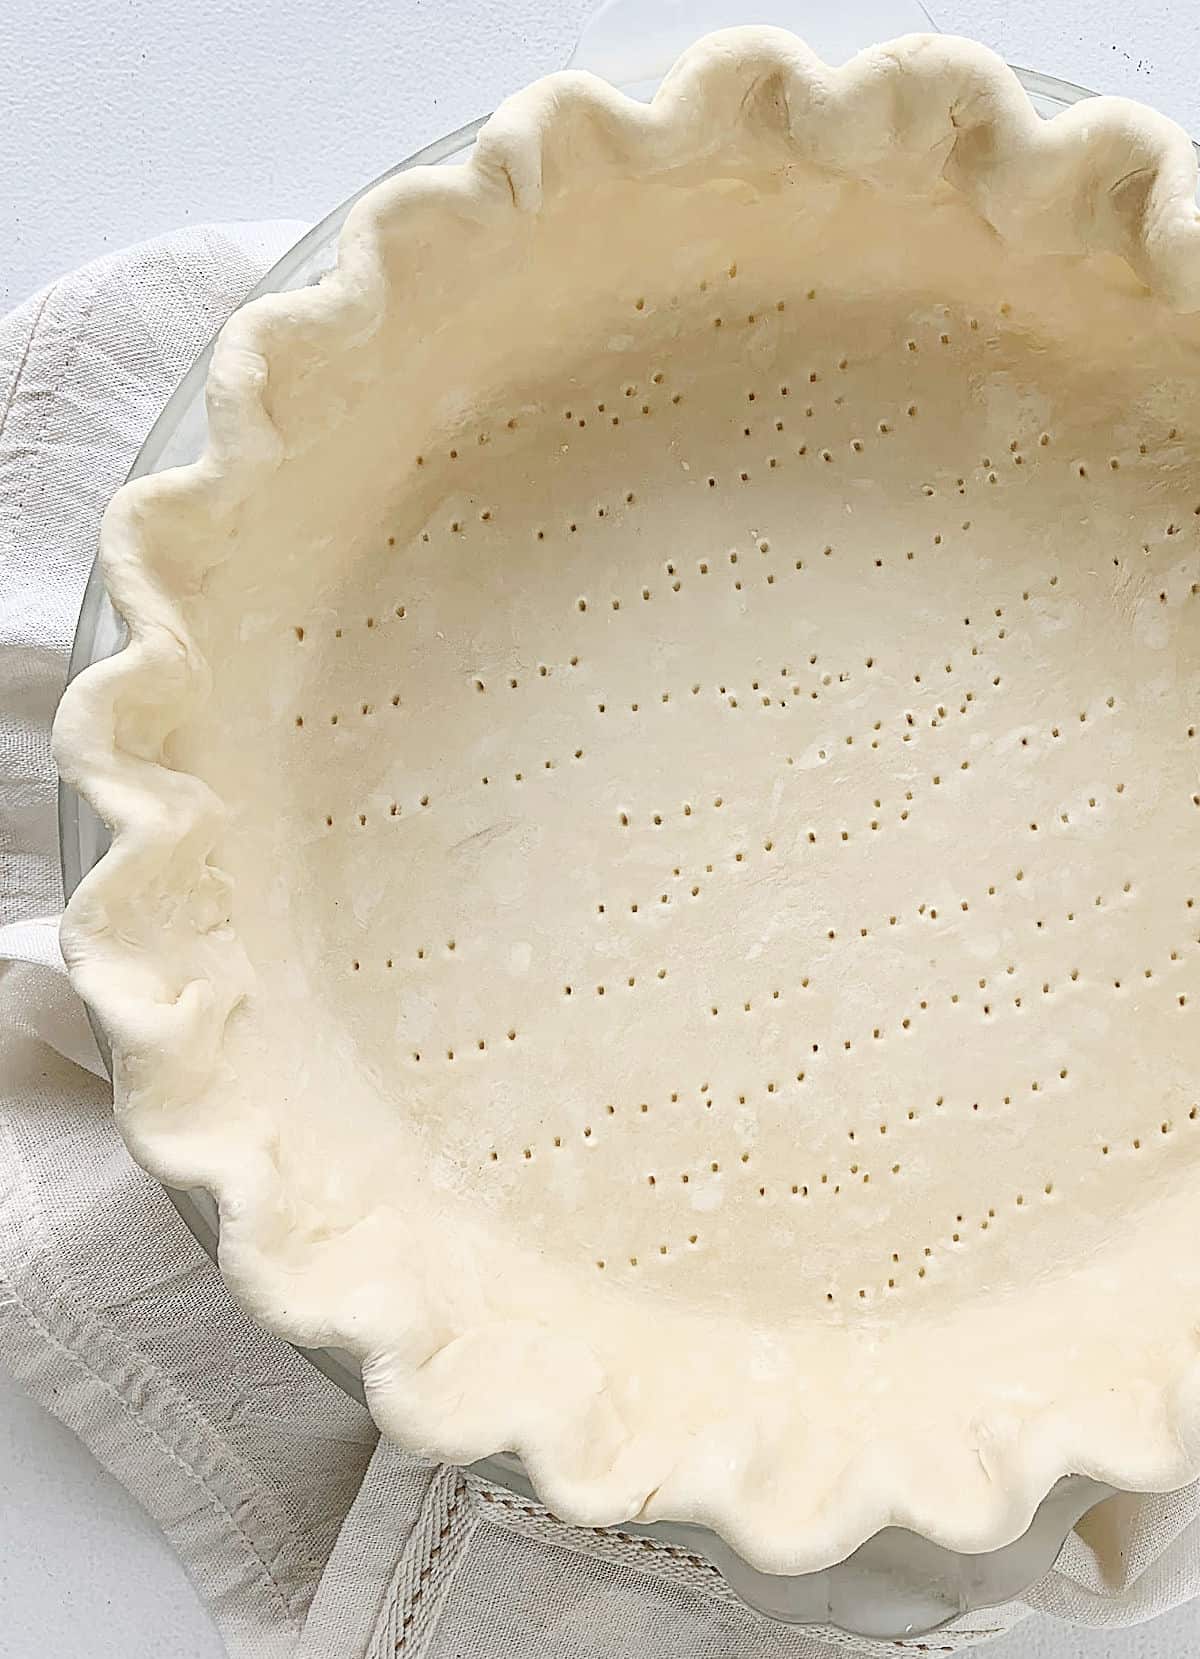 Partial view of unbaked pie crust with crimped edges on a white linen and table